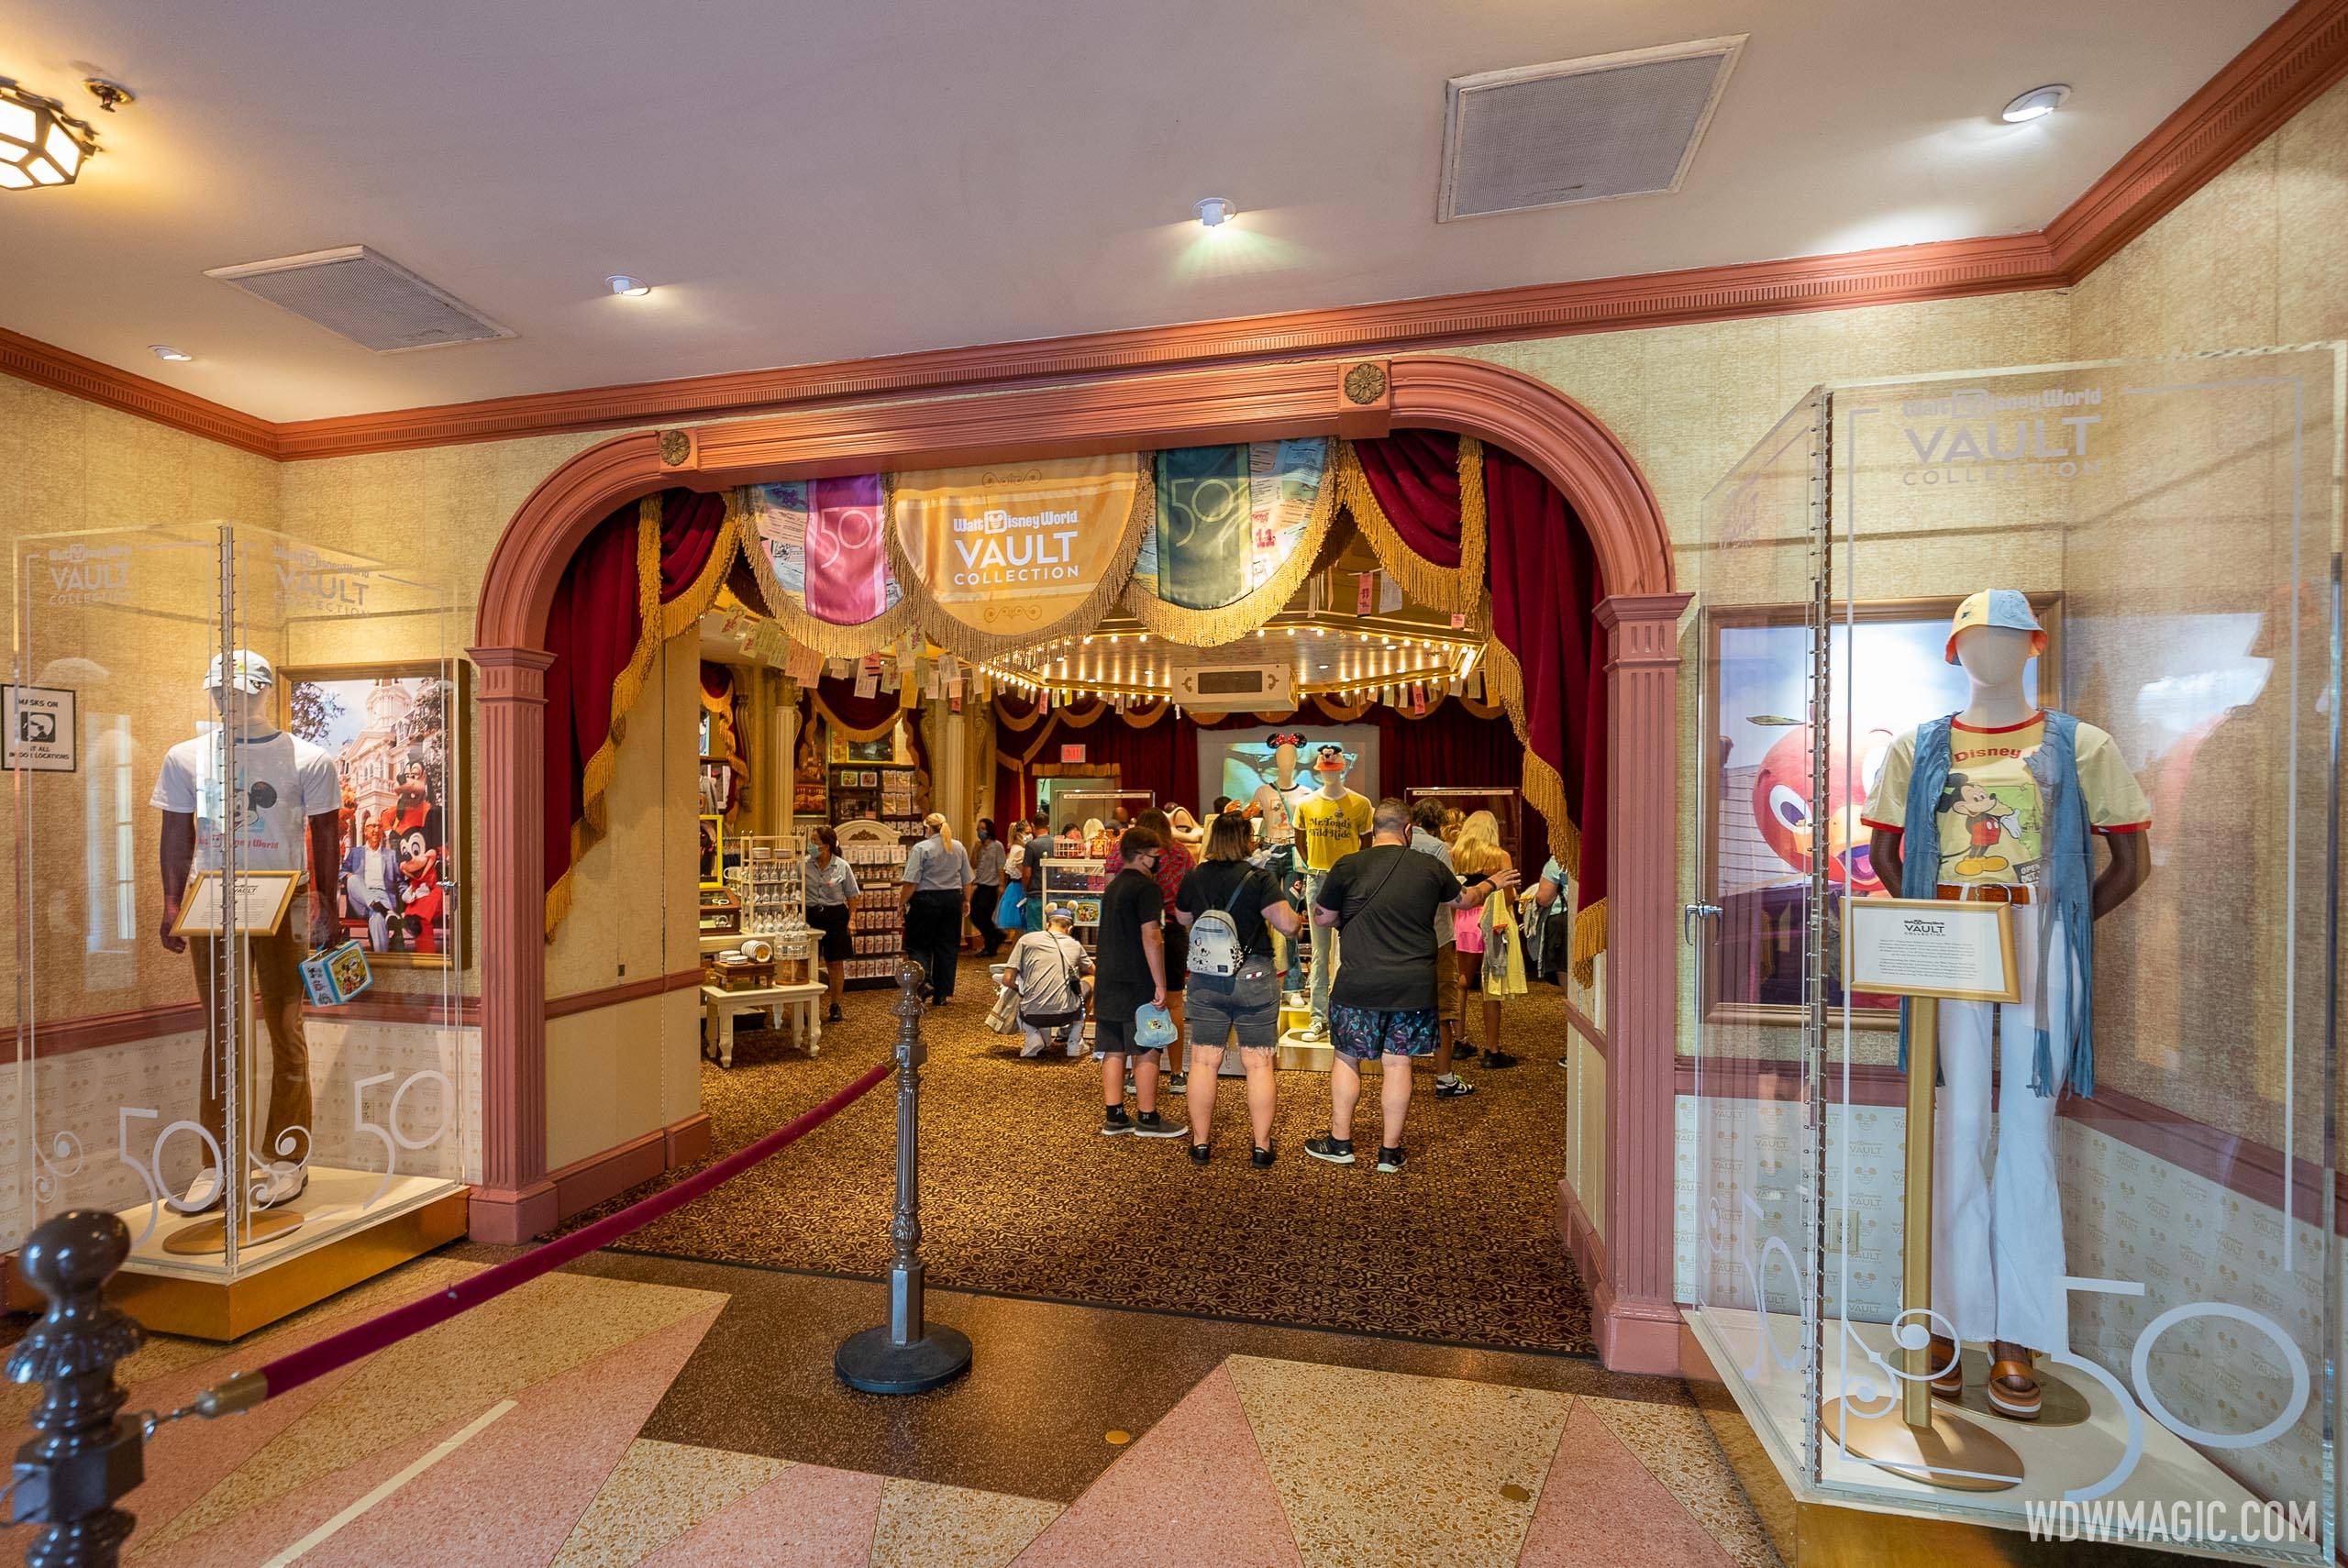 Inside the Main Street Cinema as the home of the new 50th anniversary Walt Disney World Vault Collection